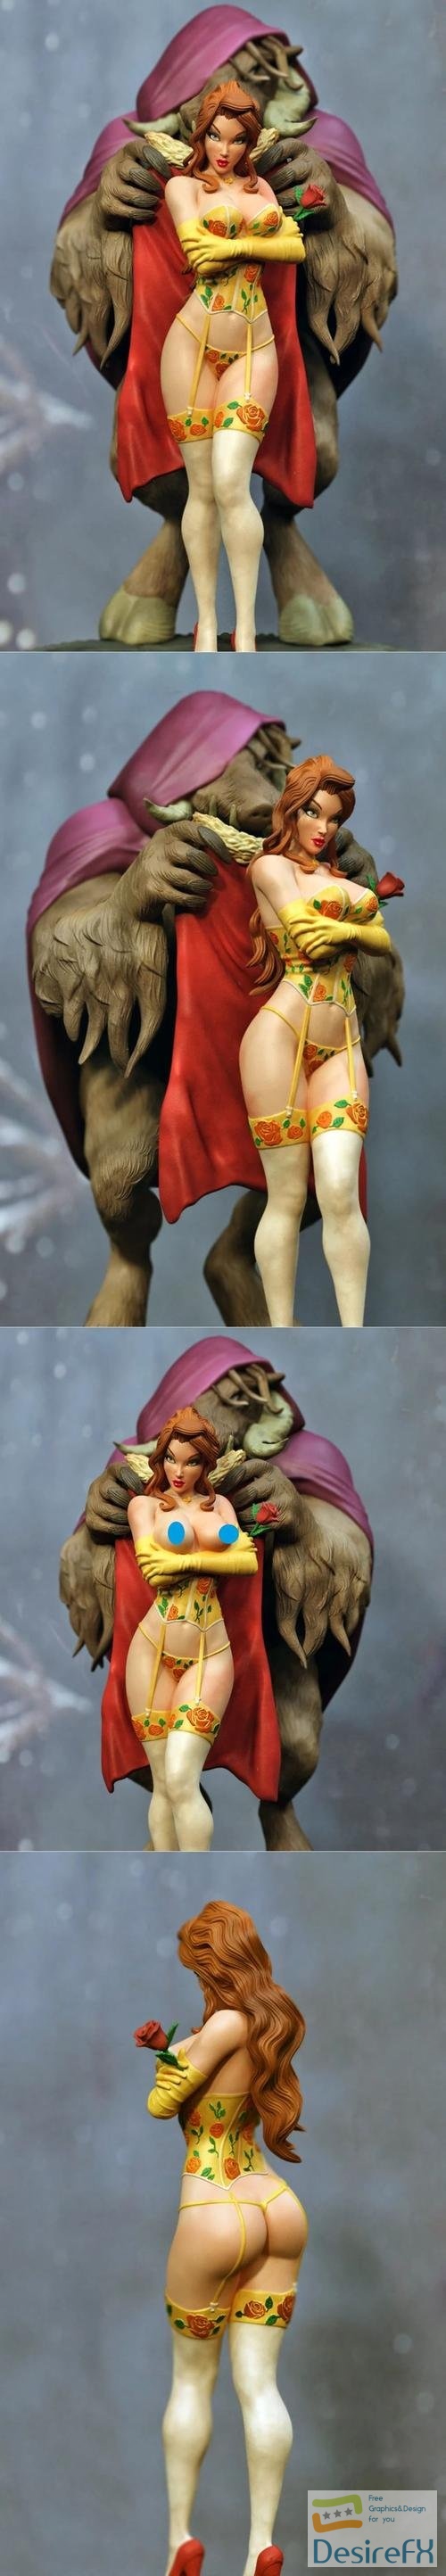 Beauty and the Beast – 3D Print